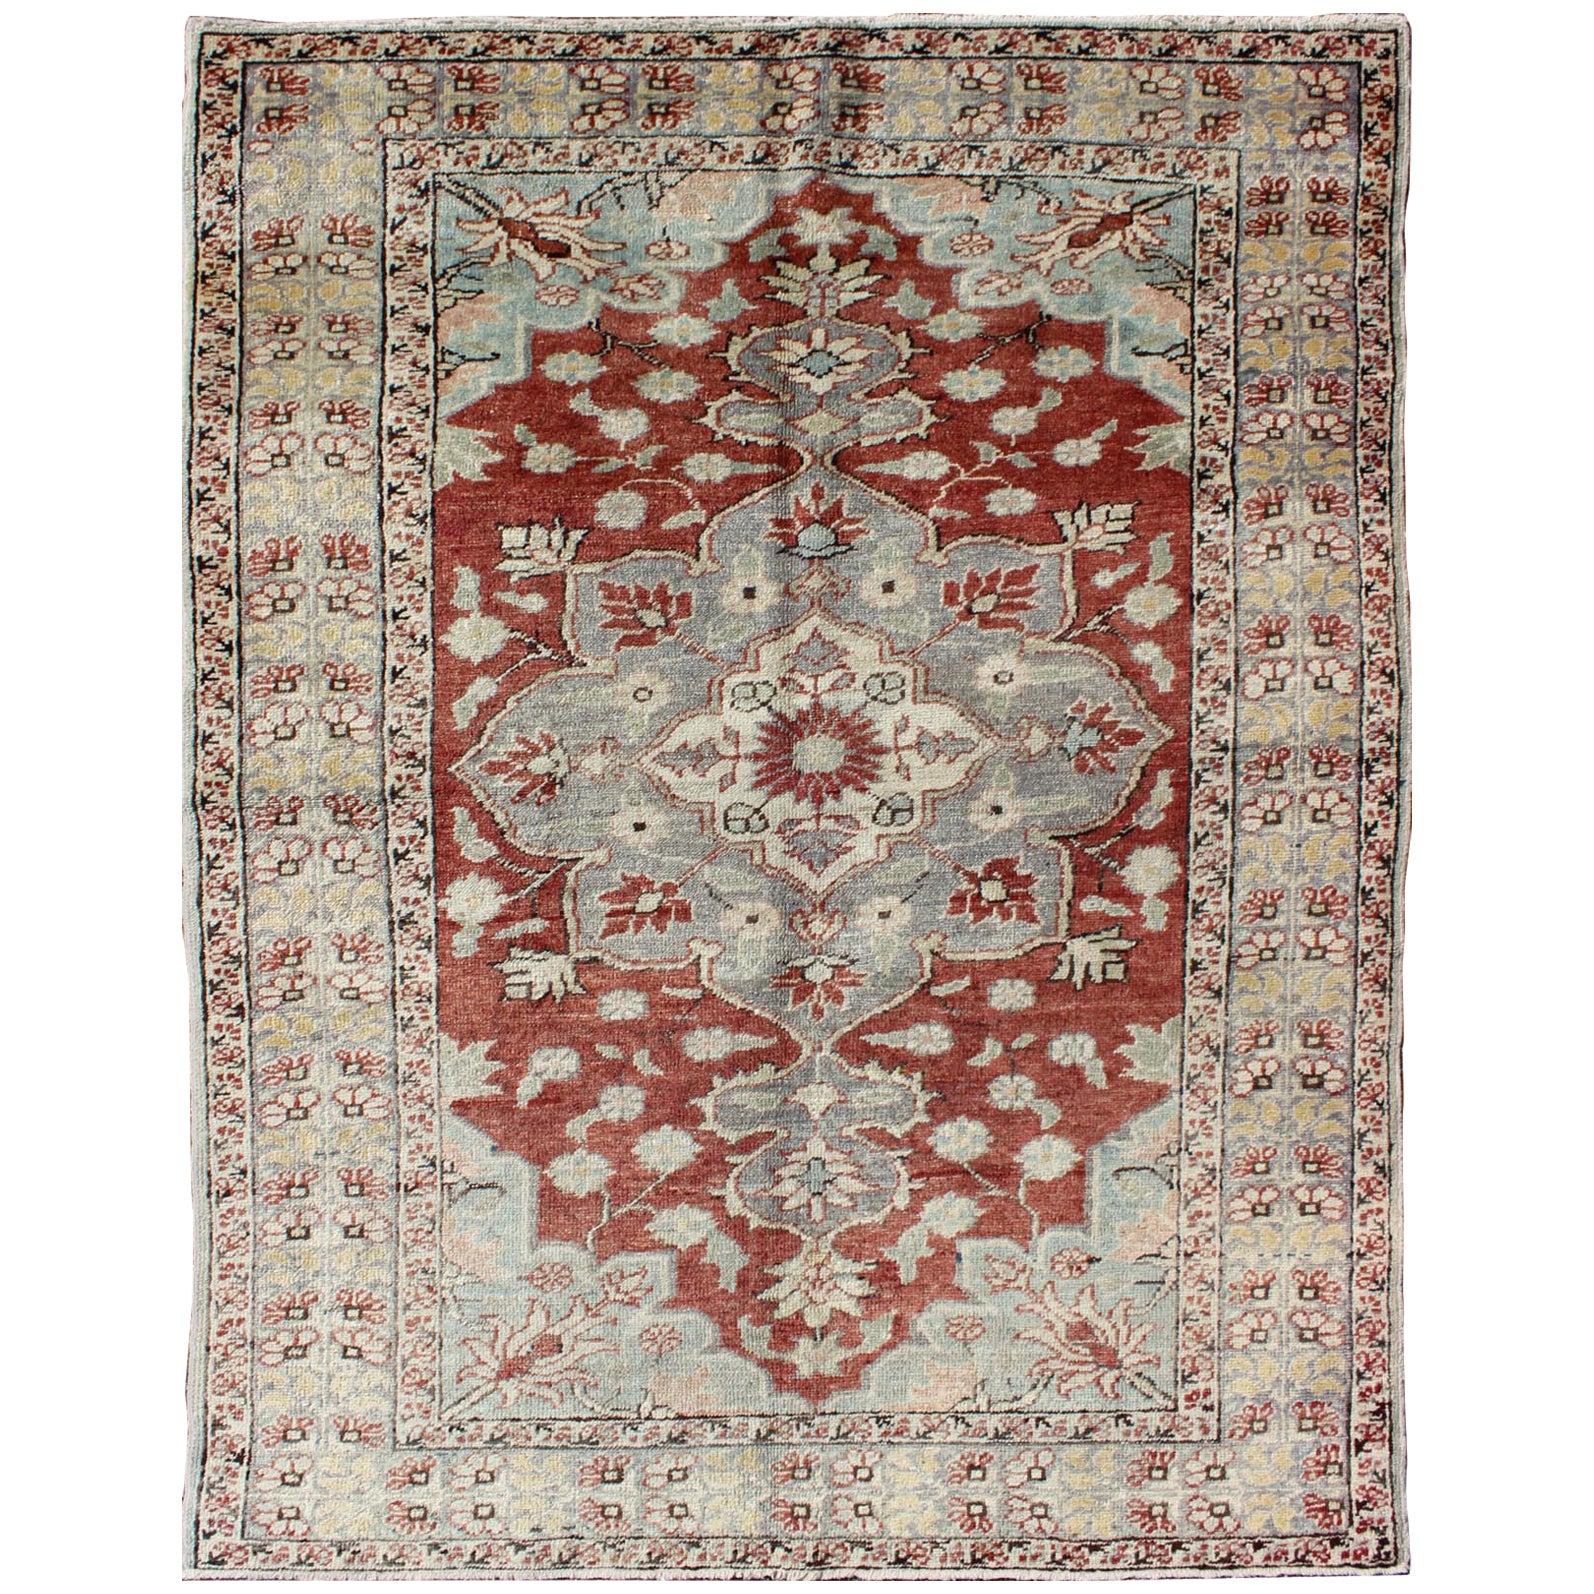 Vintage Turkish Sivas Fine Rug in Red, Light Blue, Gray & Light Yellow Green For Sale